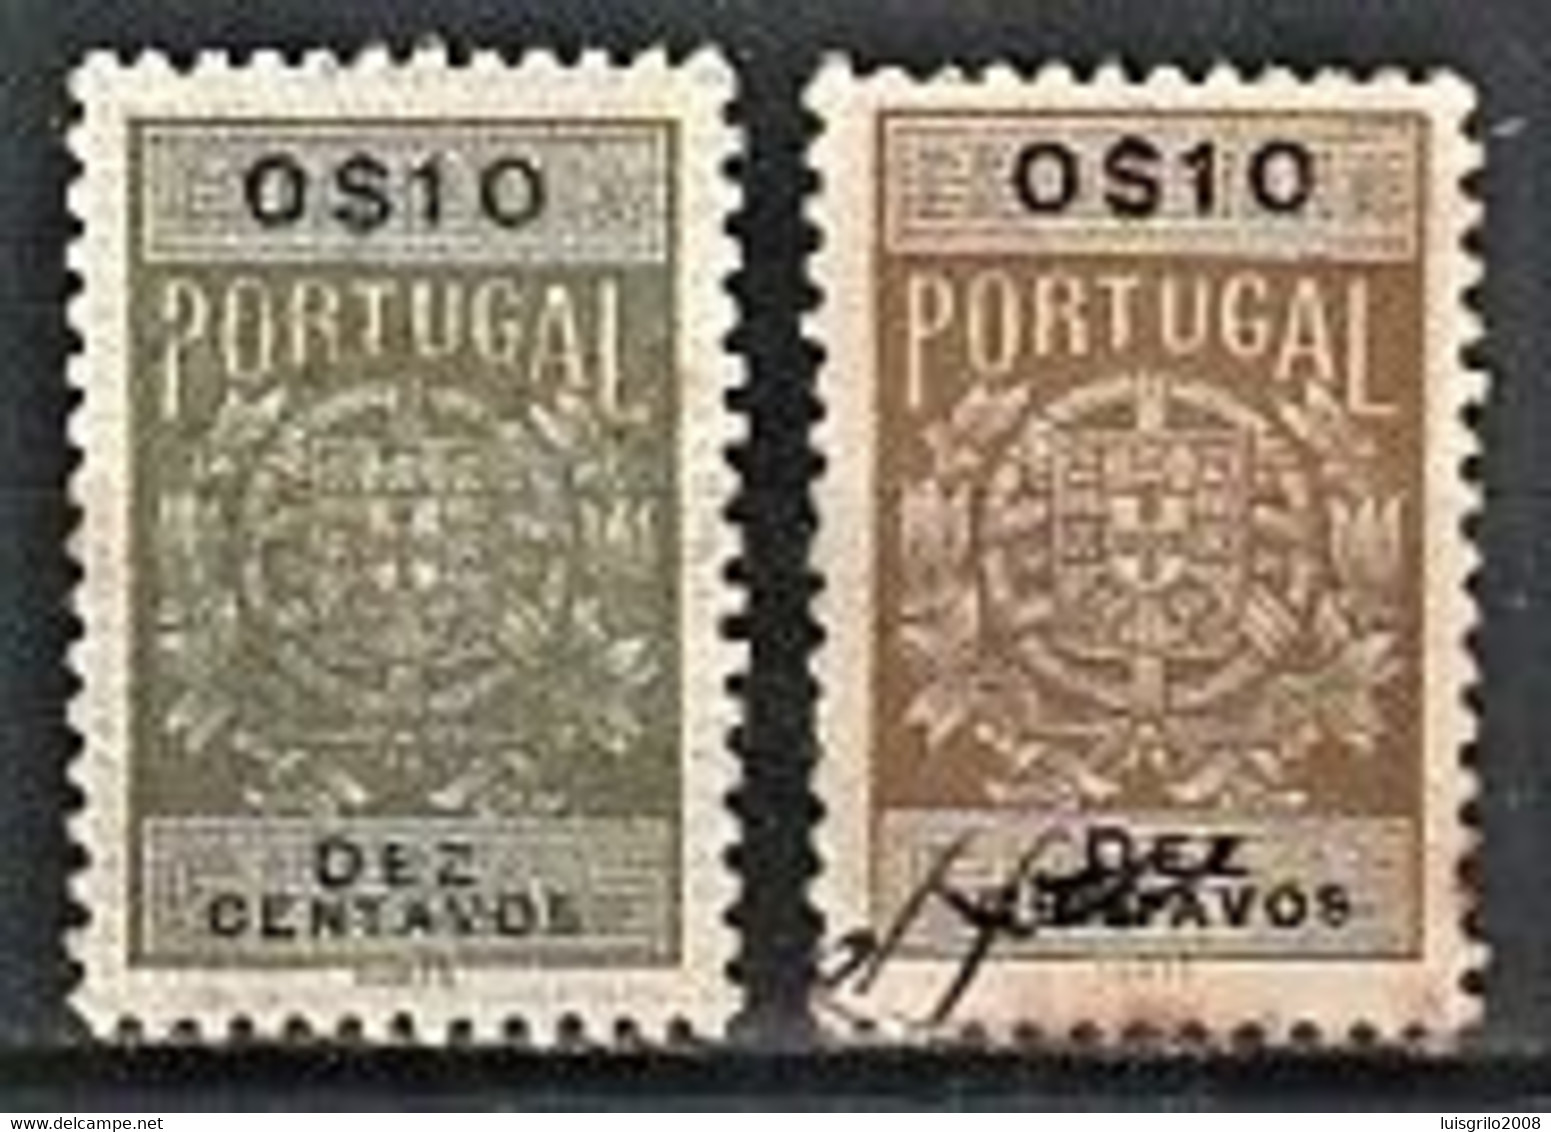 Fiscal/ Revenue, Portugal 1940 - Estampilha Fiscal -|- 0$10 - COLOR VARIANT - Is The Stamp Of The Right - Gebruikt